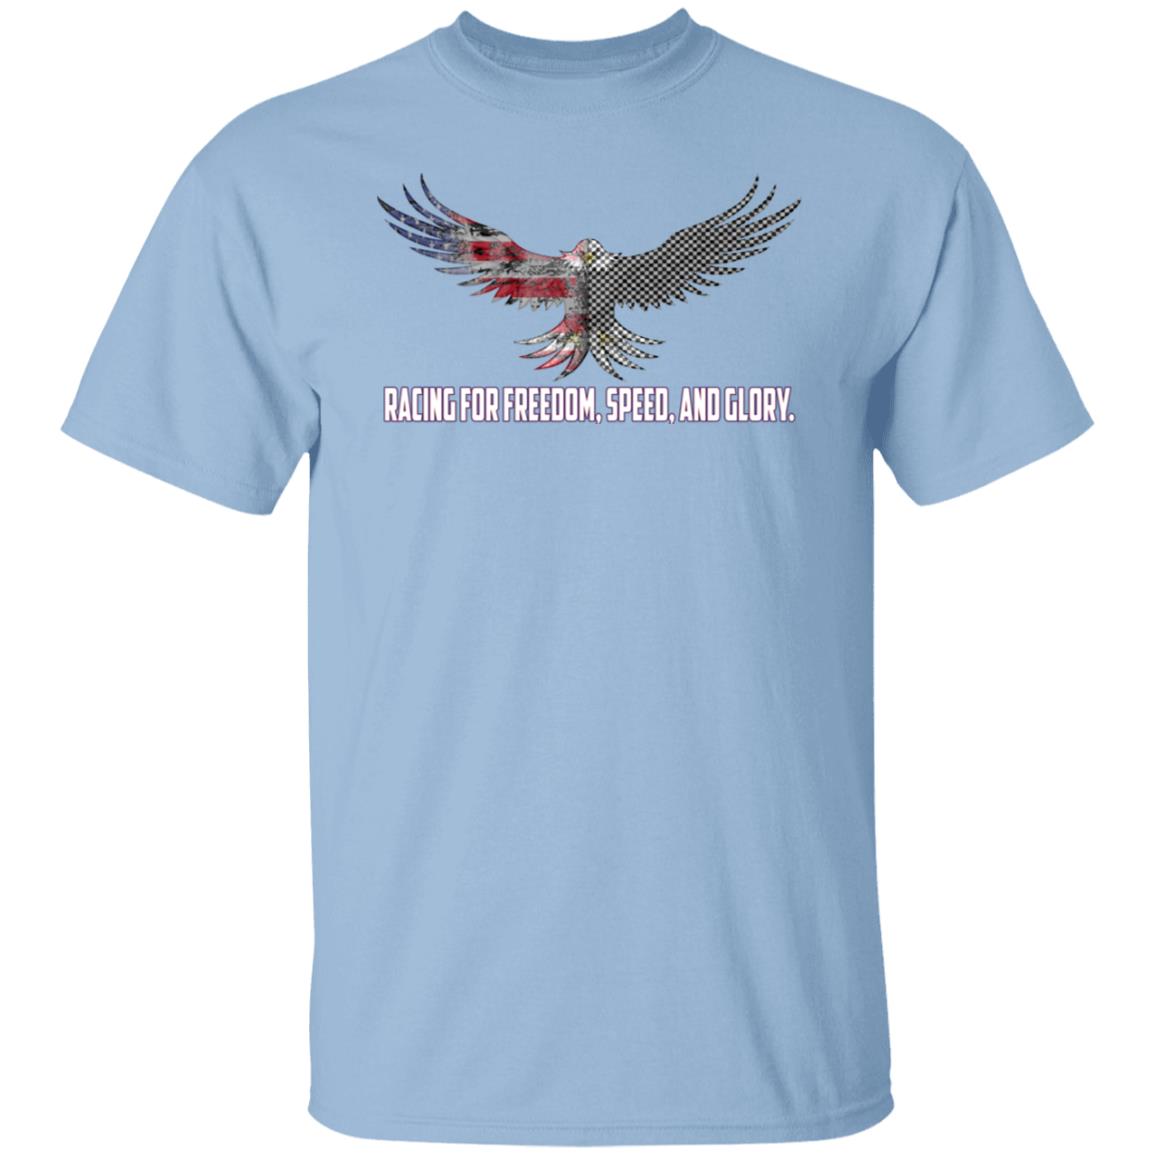 Racing For Freedom, Speed, And Glory T-Shirt